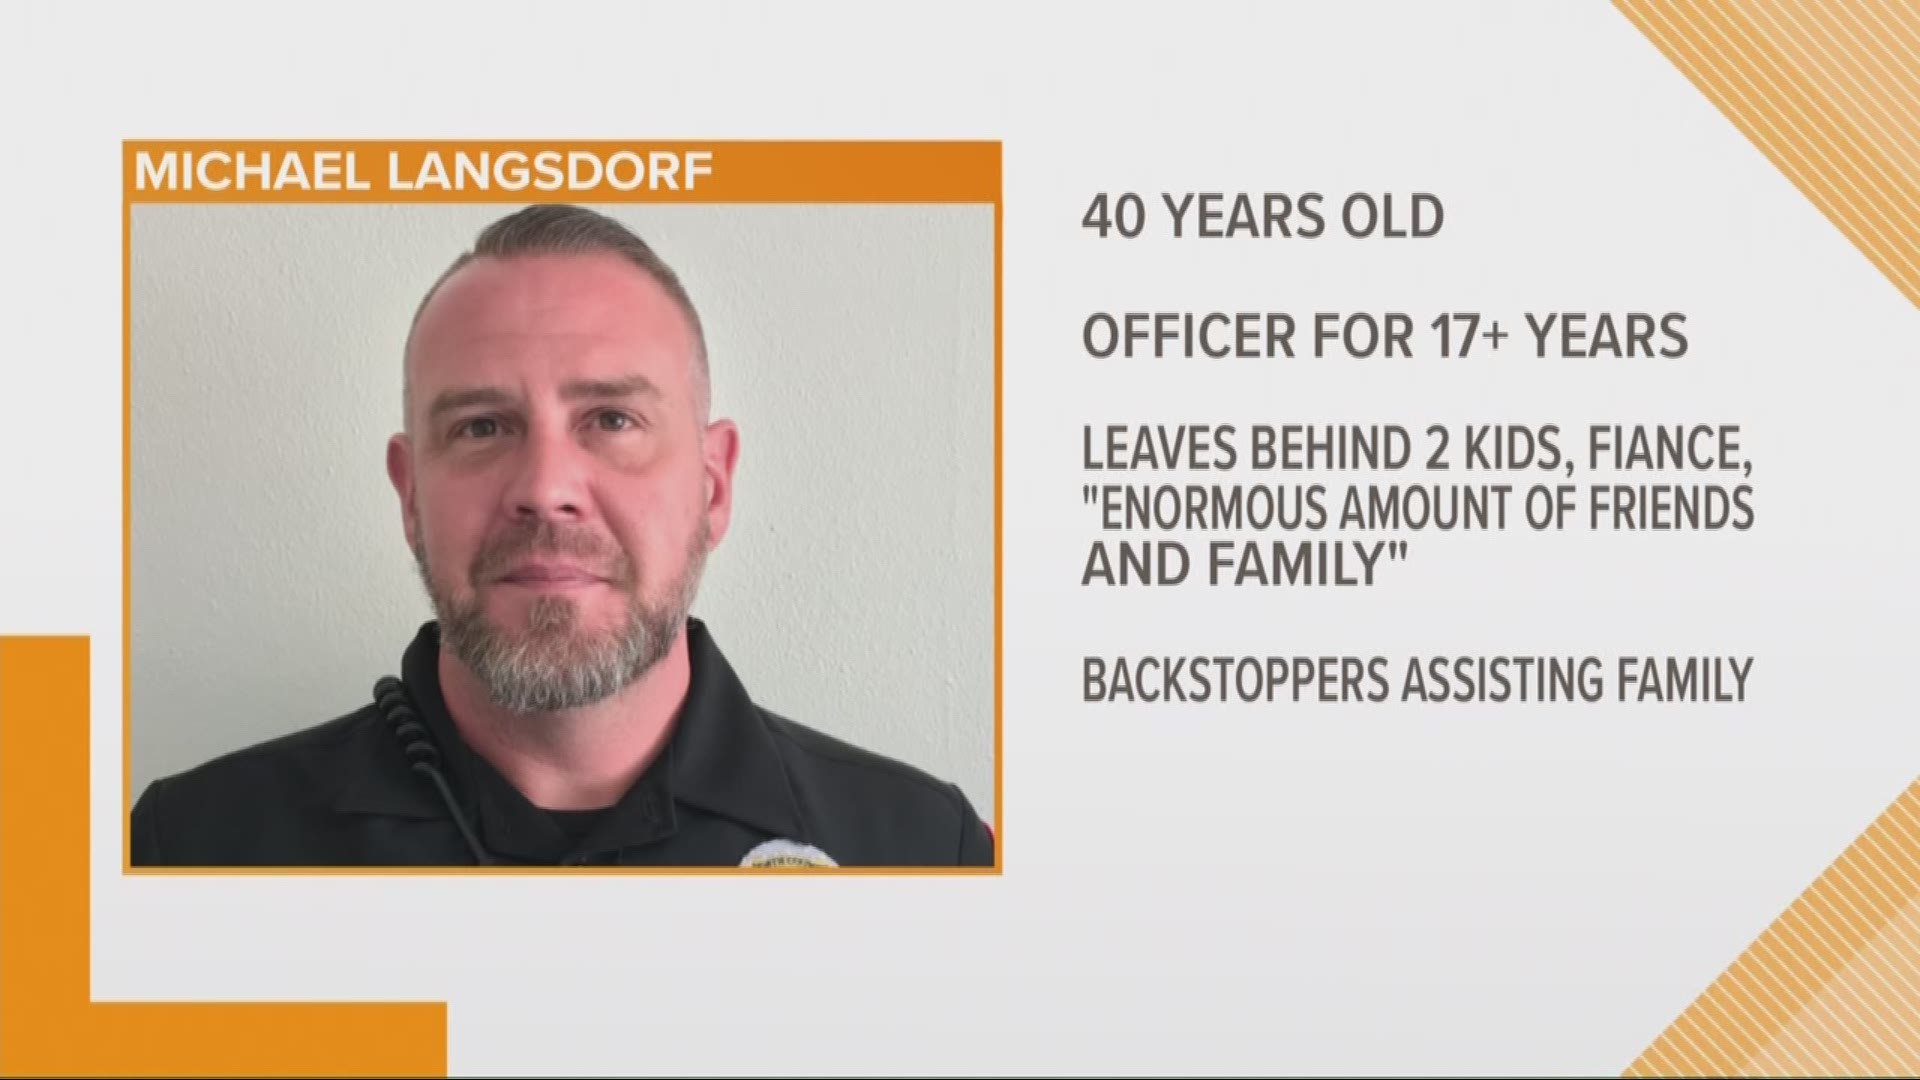 Officer Michael Langsdorf was shot and killed on duty Sunday afternoon after responding to a market for the report of a bad check. In various ways, the law enforcement community is showing its support to honor Officer Langsdorf.